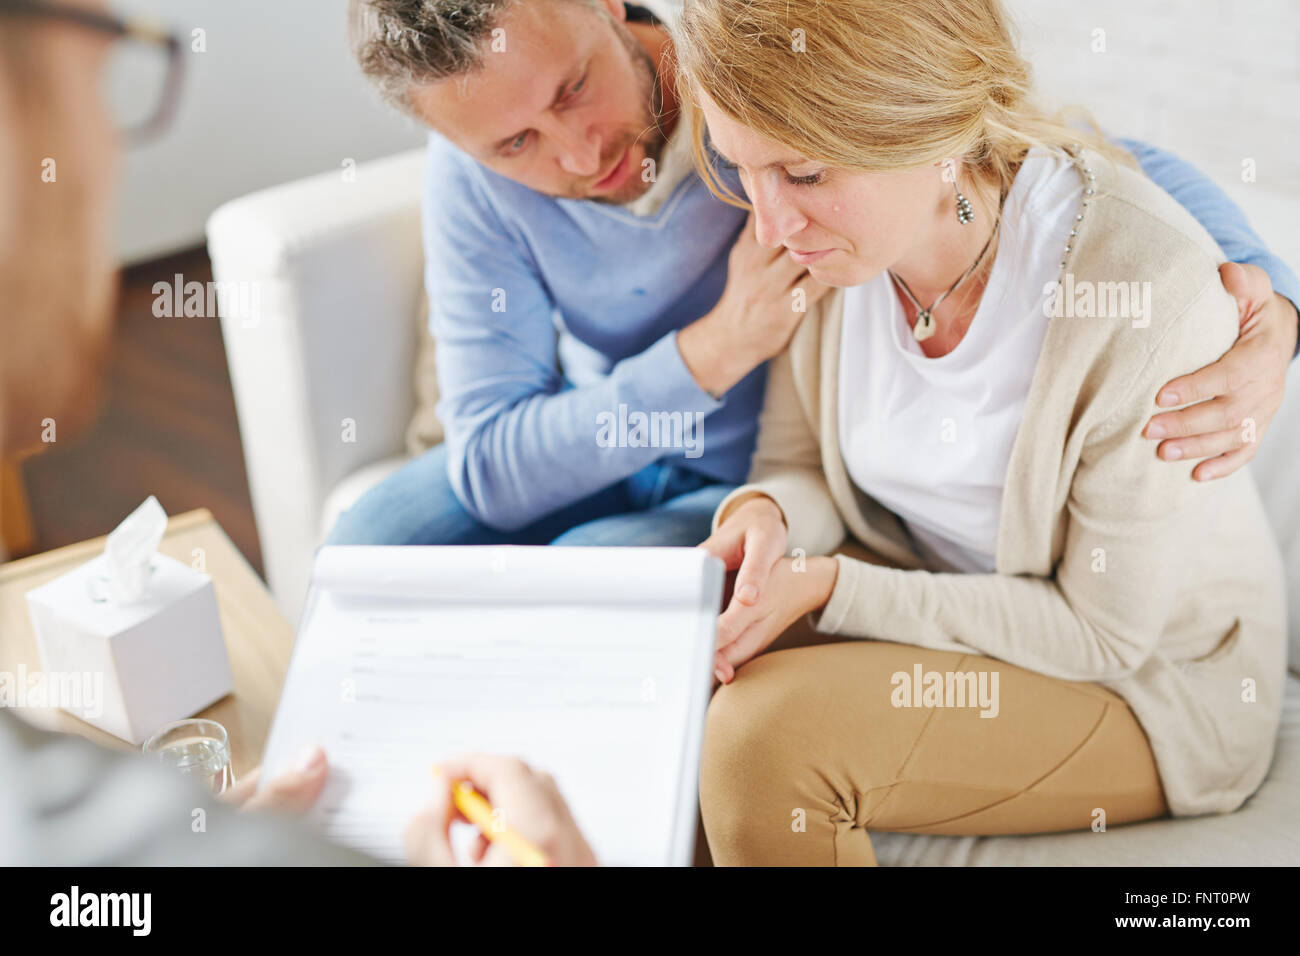 Crying woman visiting psychologist with her husband Stock Photo